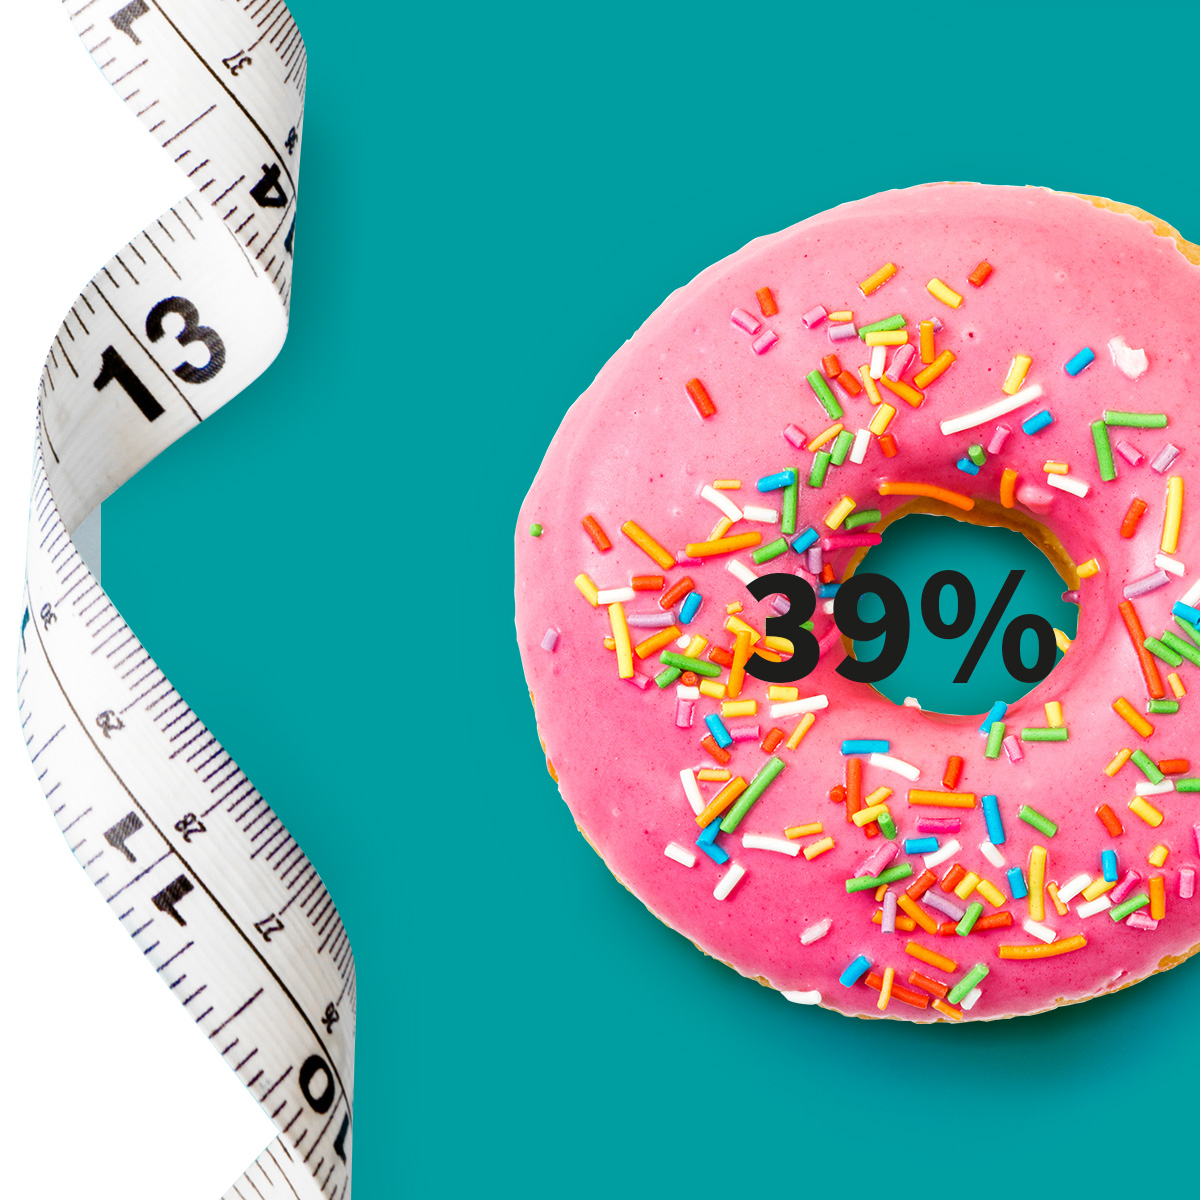 [.NO-no Norway (norwegian)] •	A measuring tape and a doughnut with pink icing and colourful sugar sprinkle as a metaphor for obesity